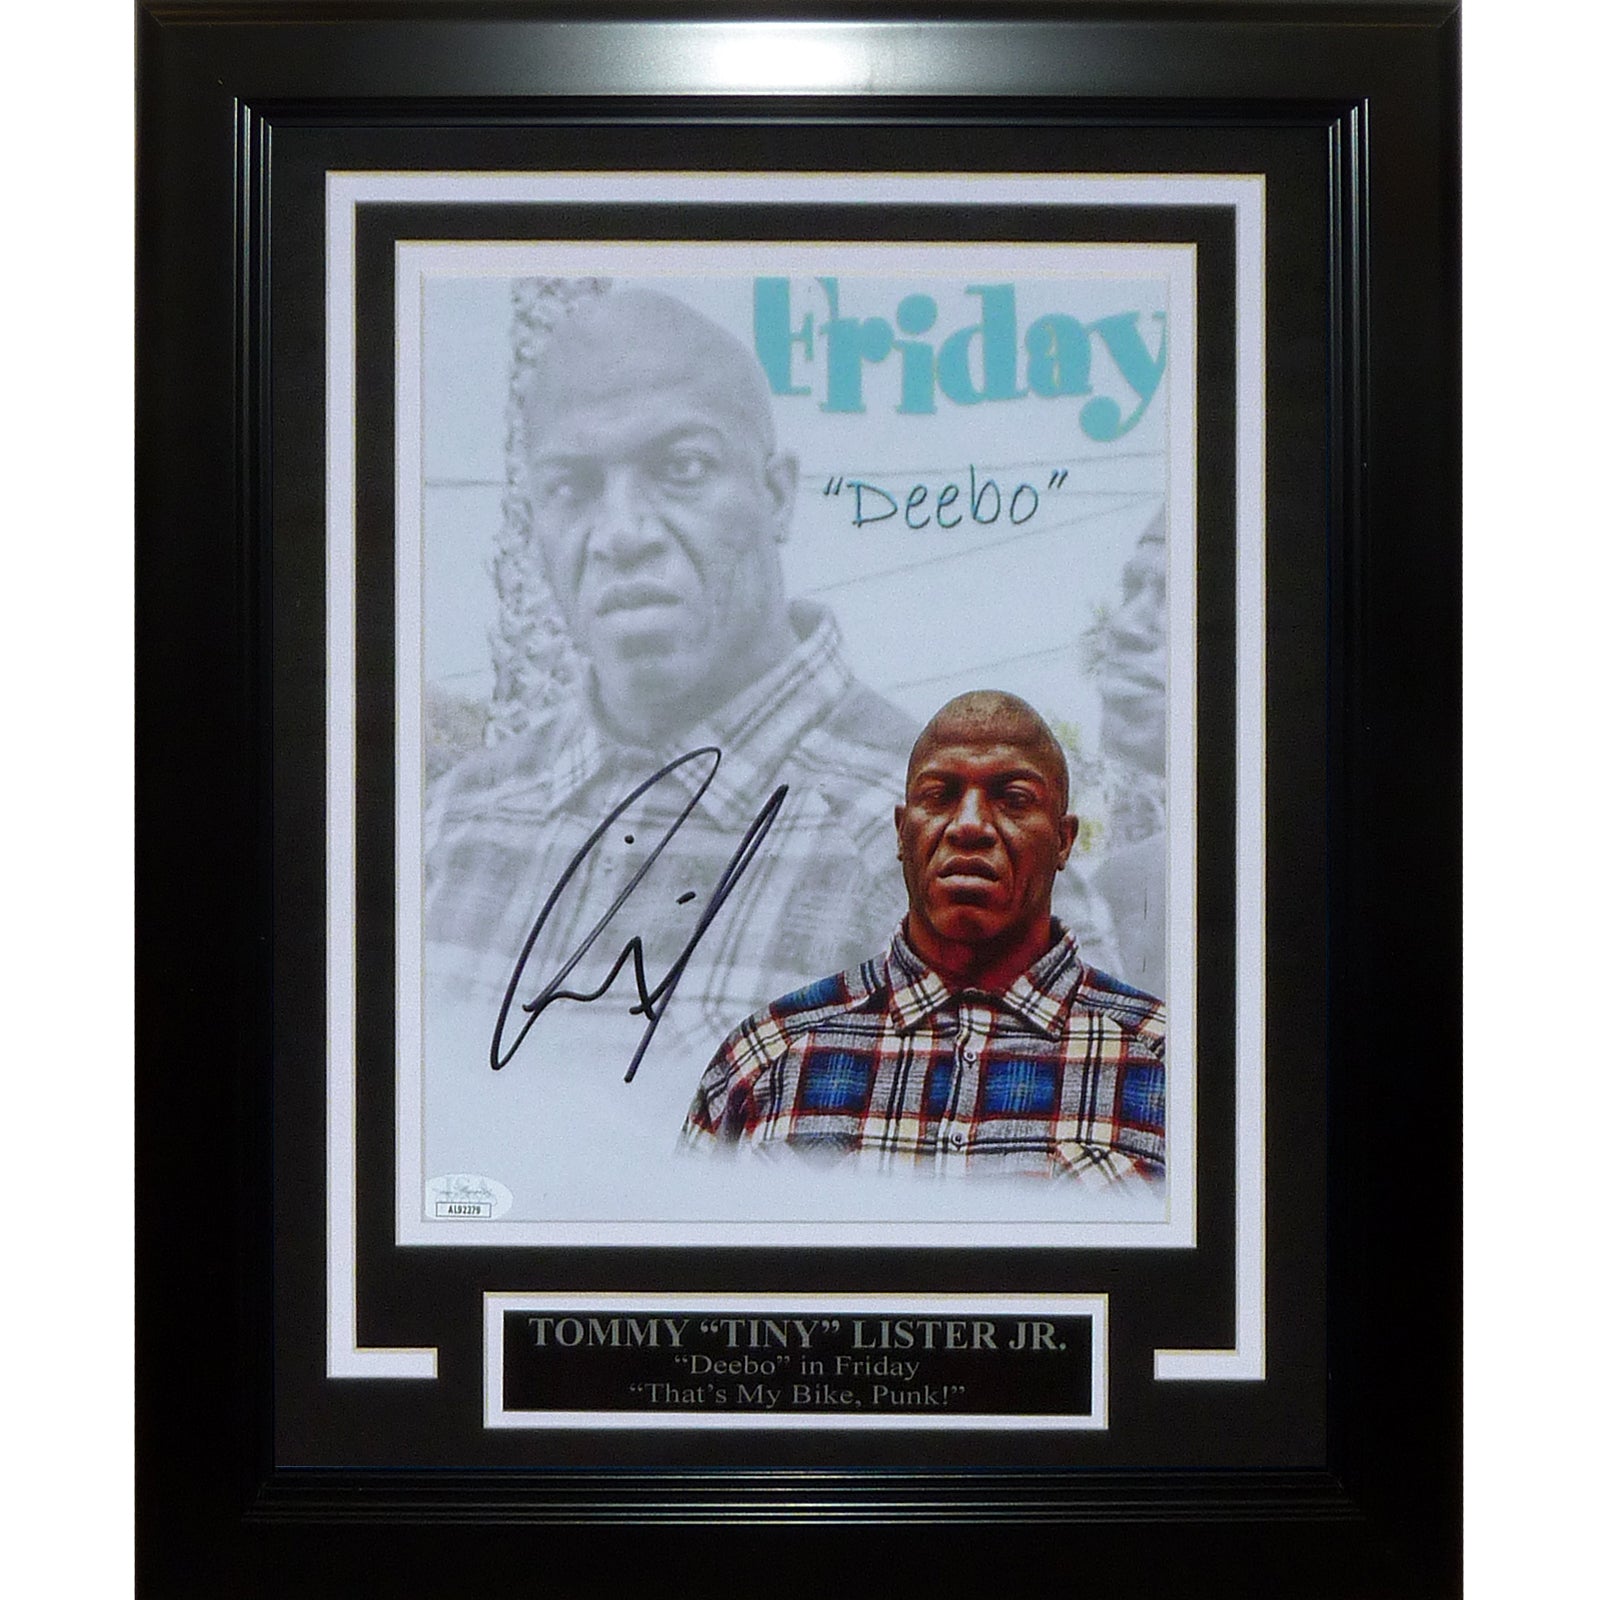 Tommy Tiny Lister AKA Deebo (Friday Collage) Autographed Deluxe Framed 8x10 Photo - JSA